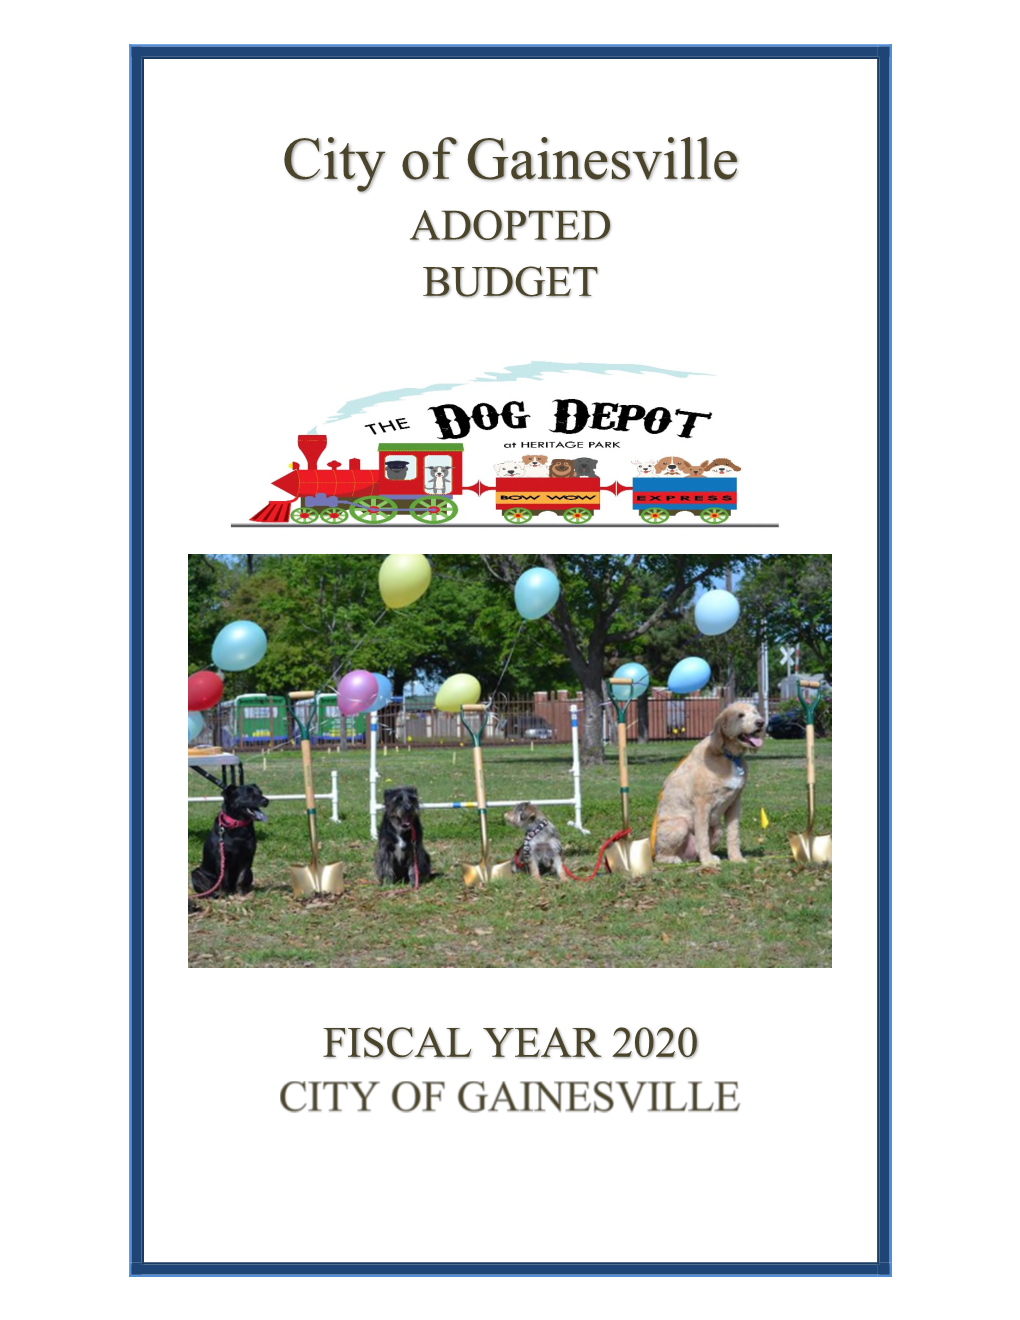 City of Gainesville ADOPTED BUDGET